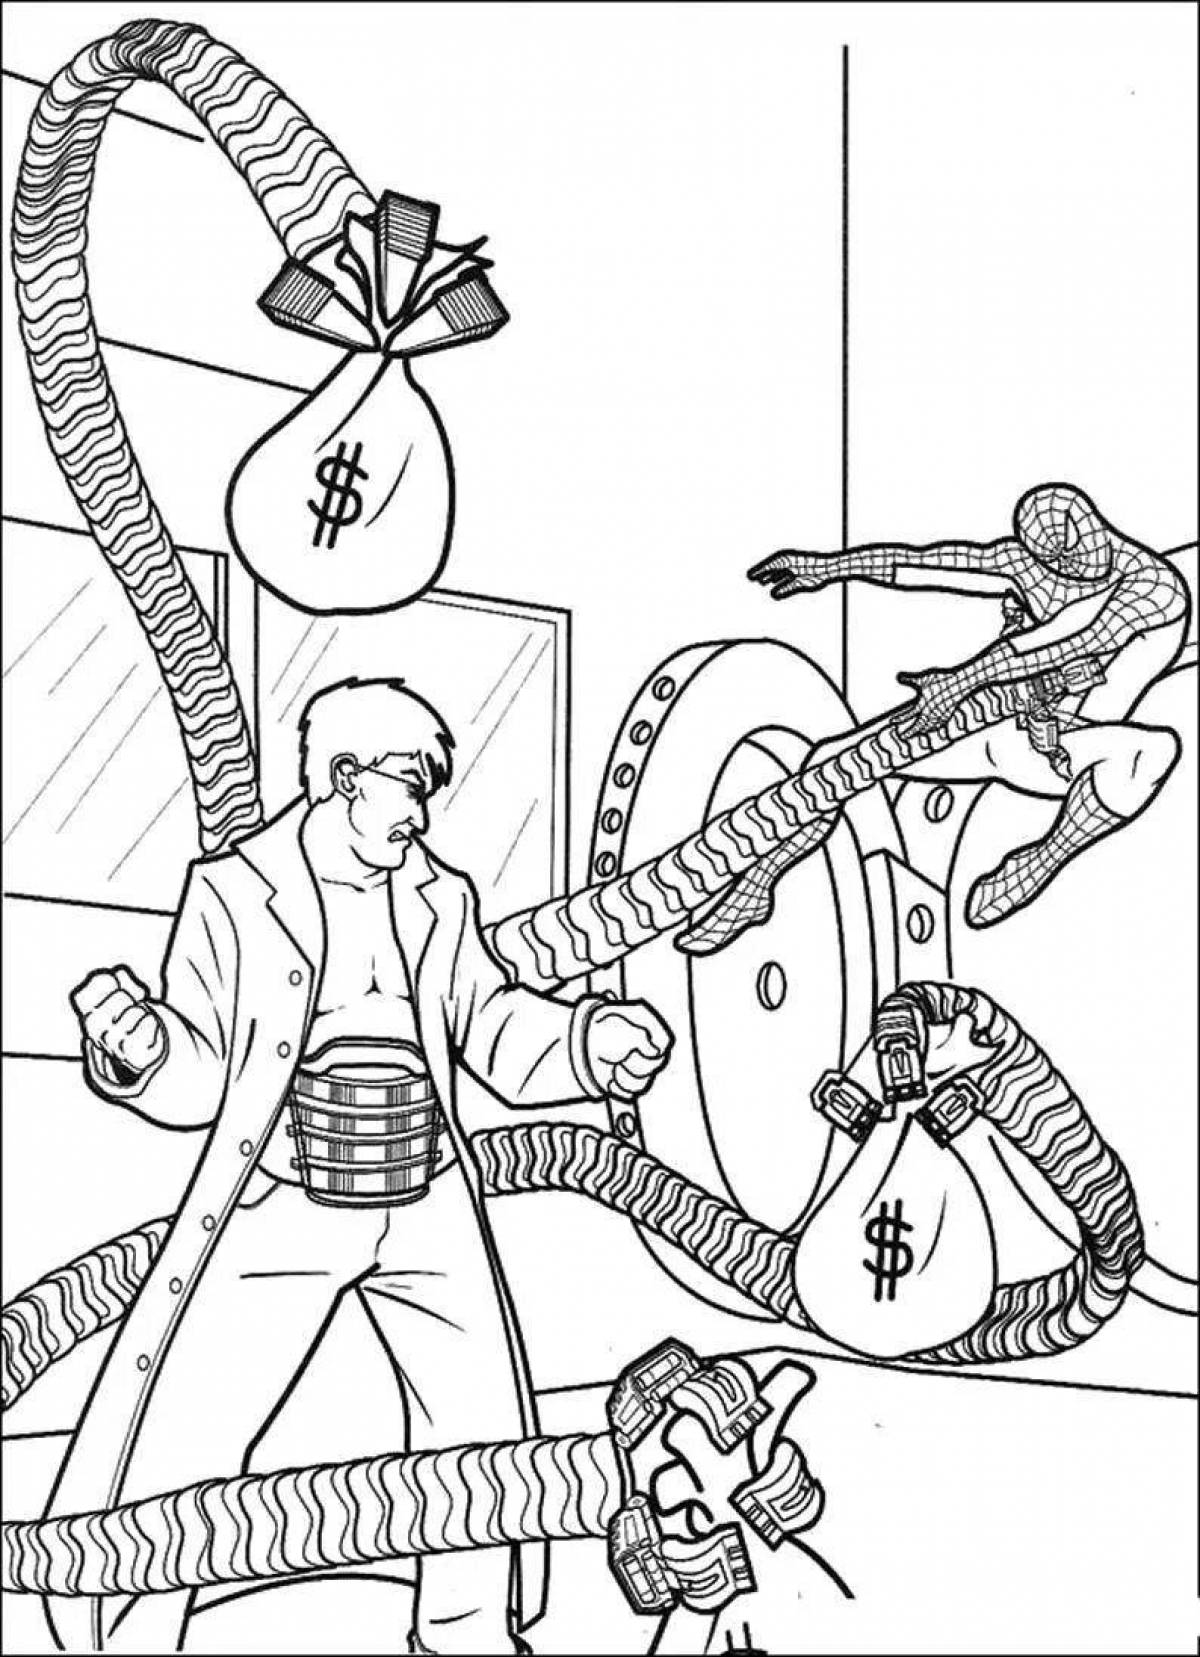 Coloring page elegant doctor octopus